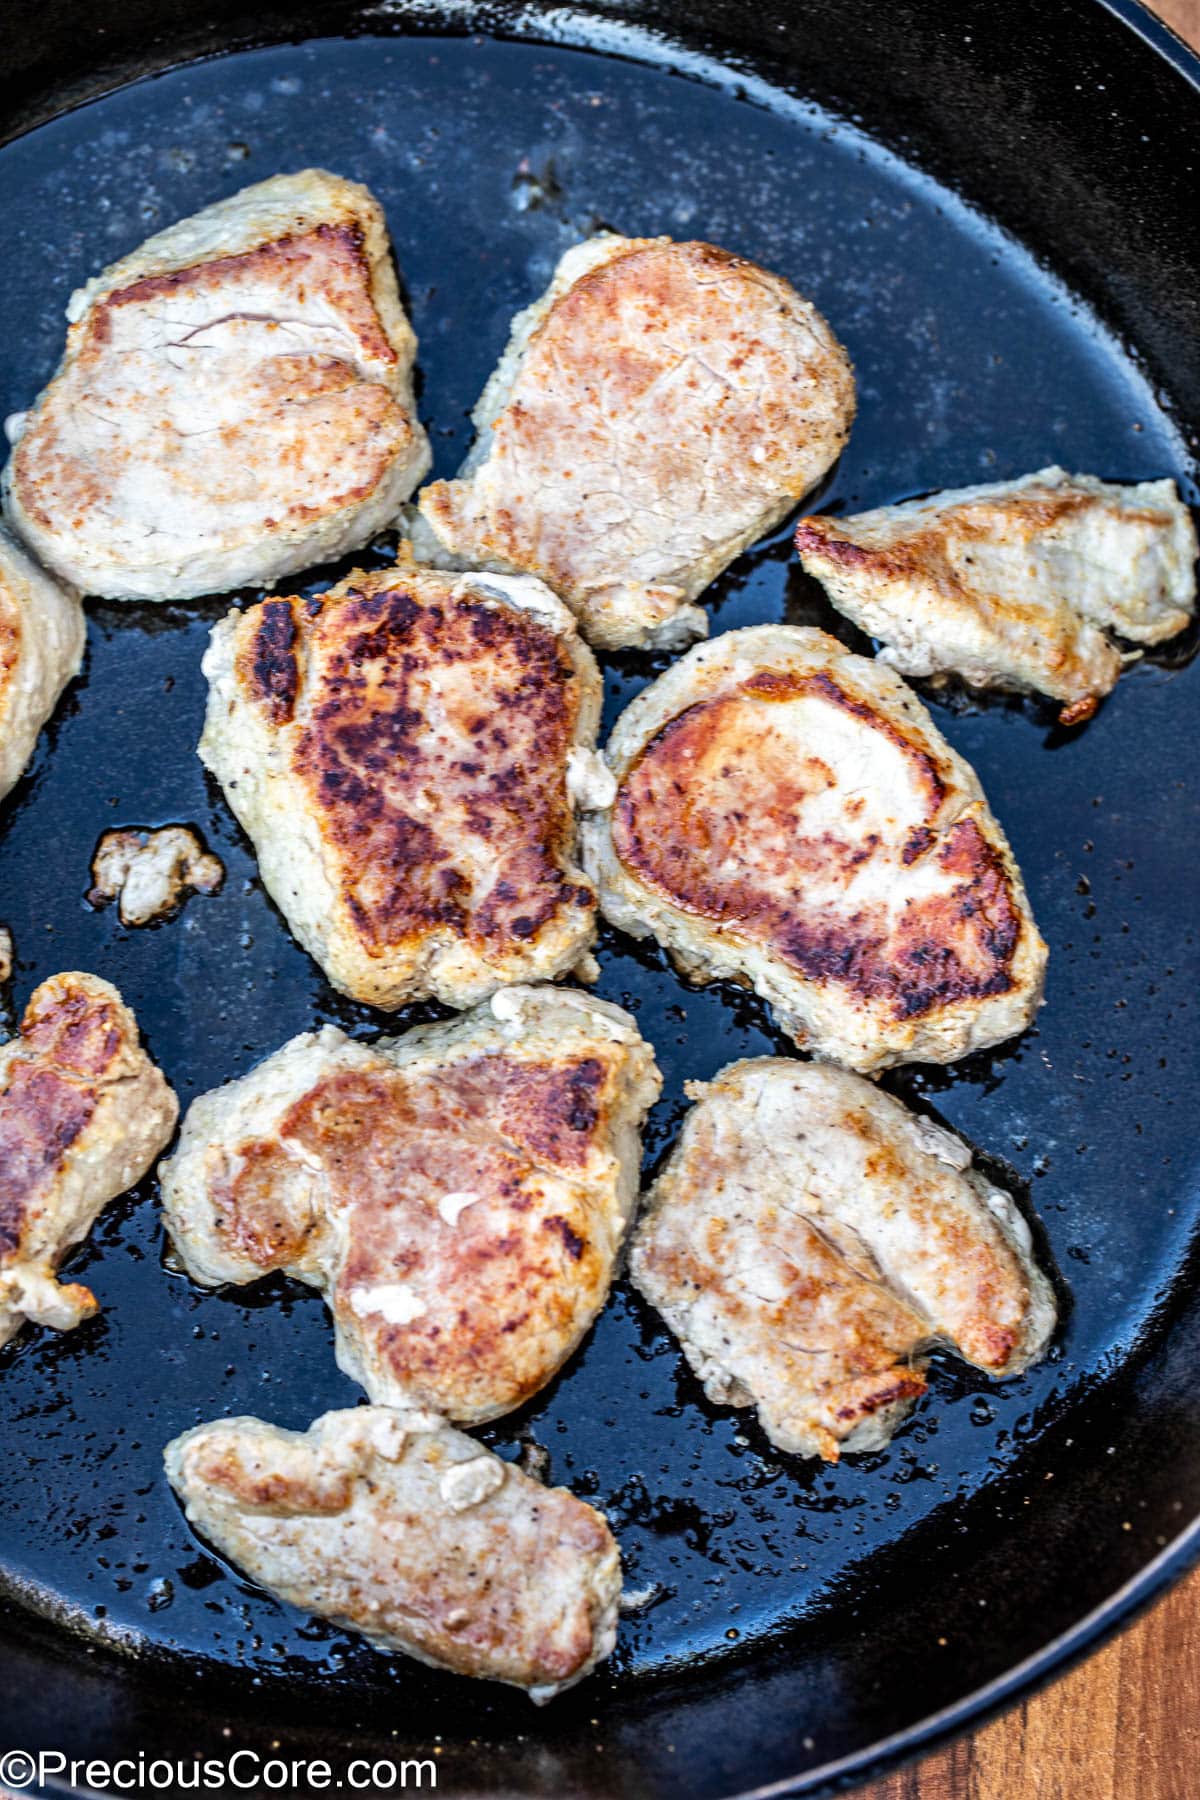 Seared pork medallions in a cast iron skillet.